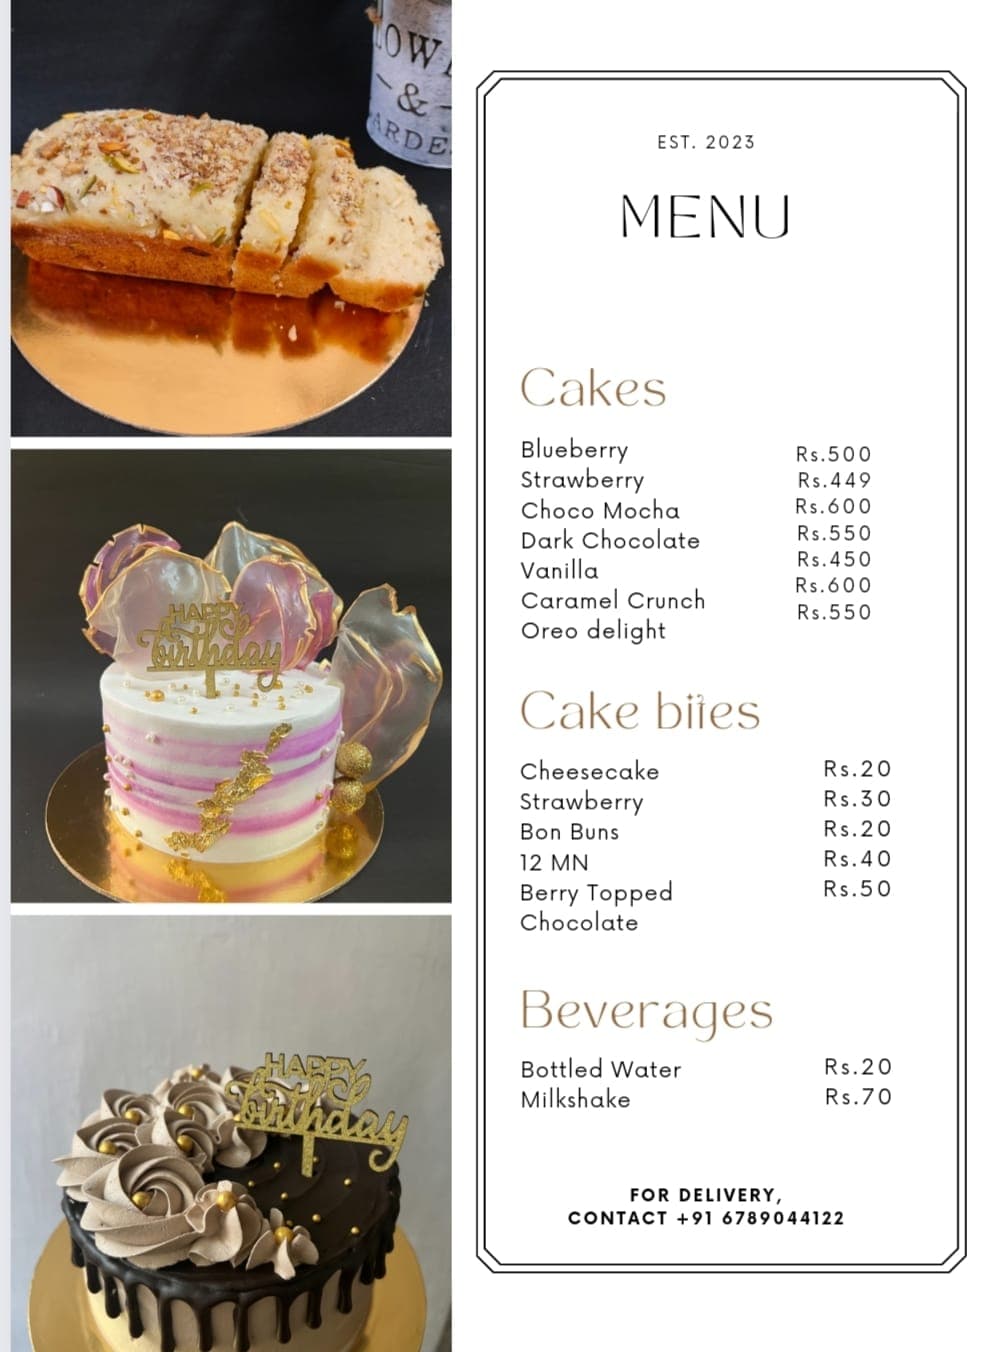 pastries and cakes with a menu